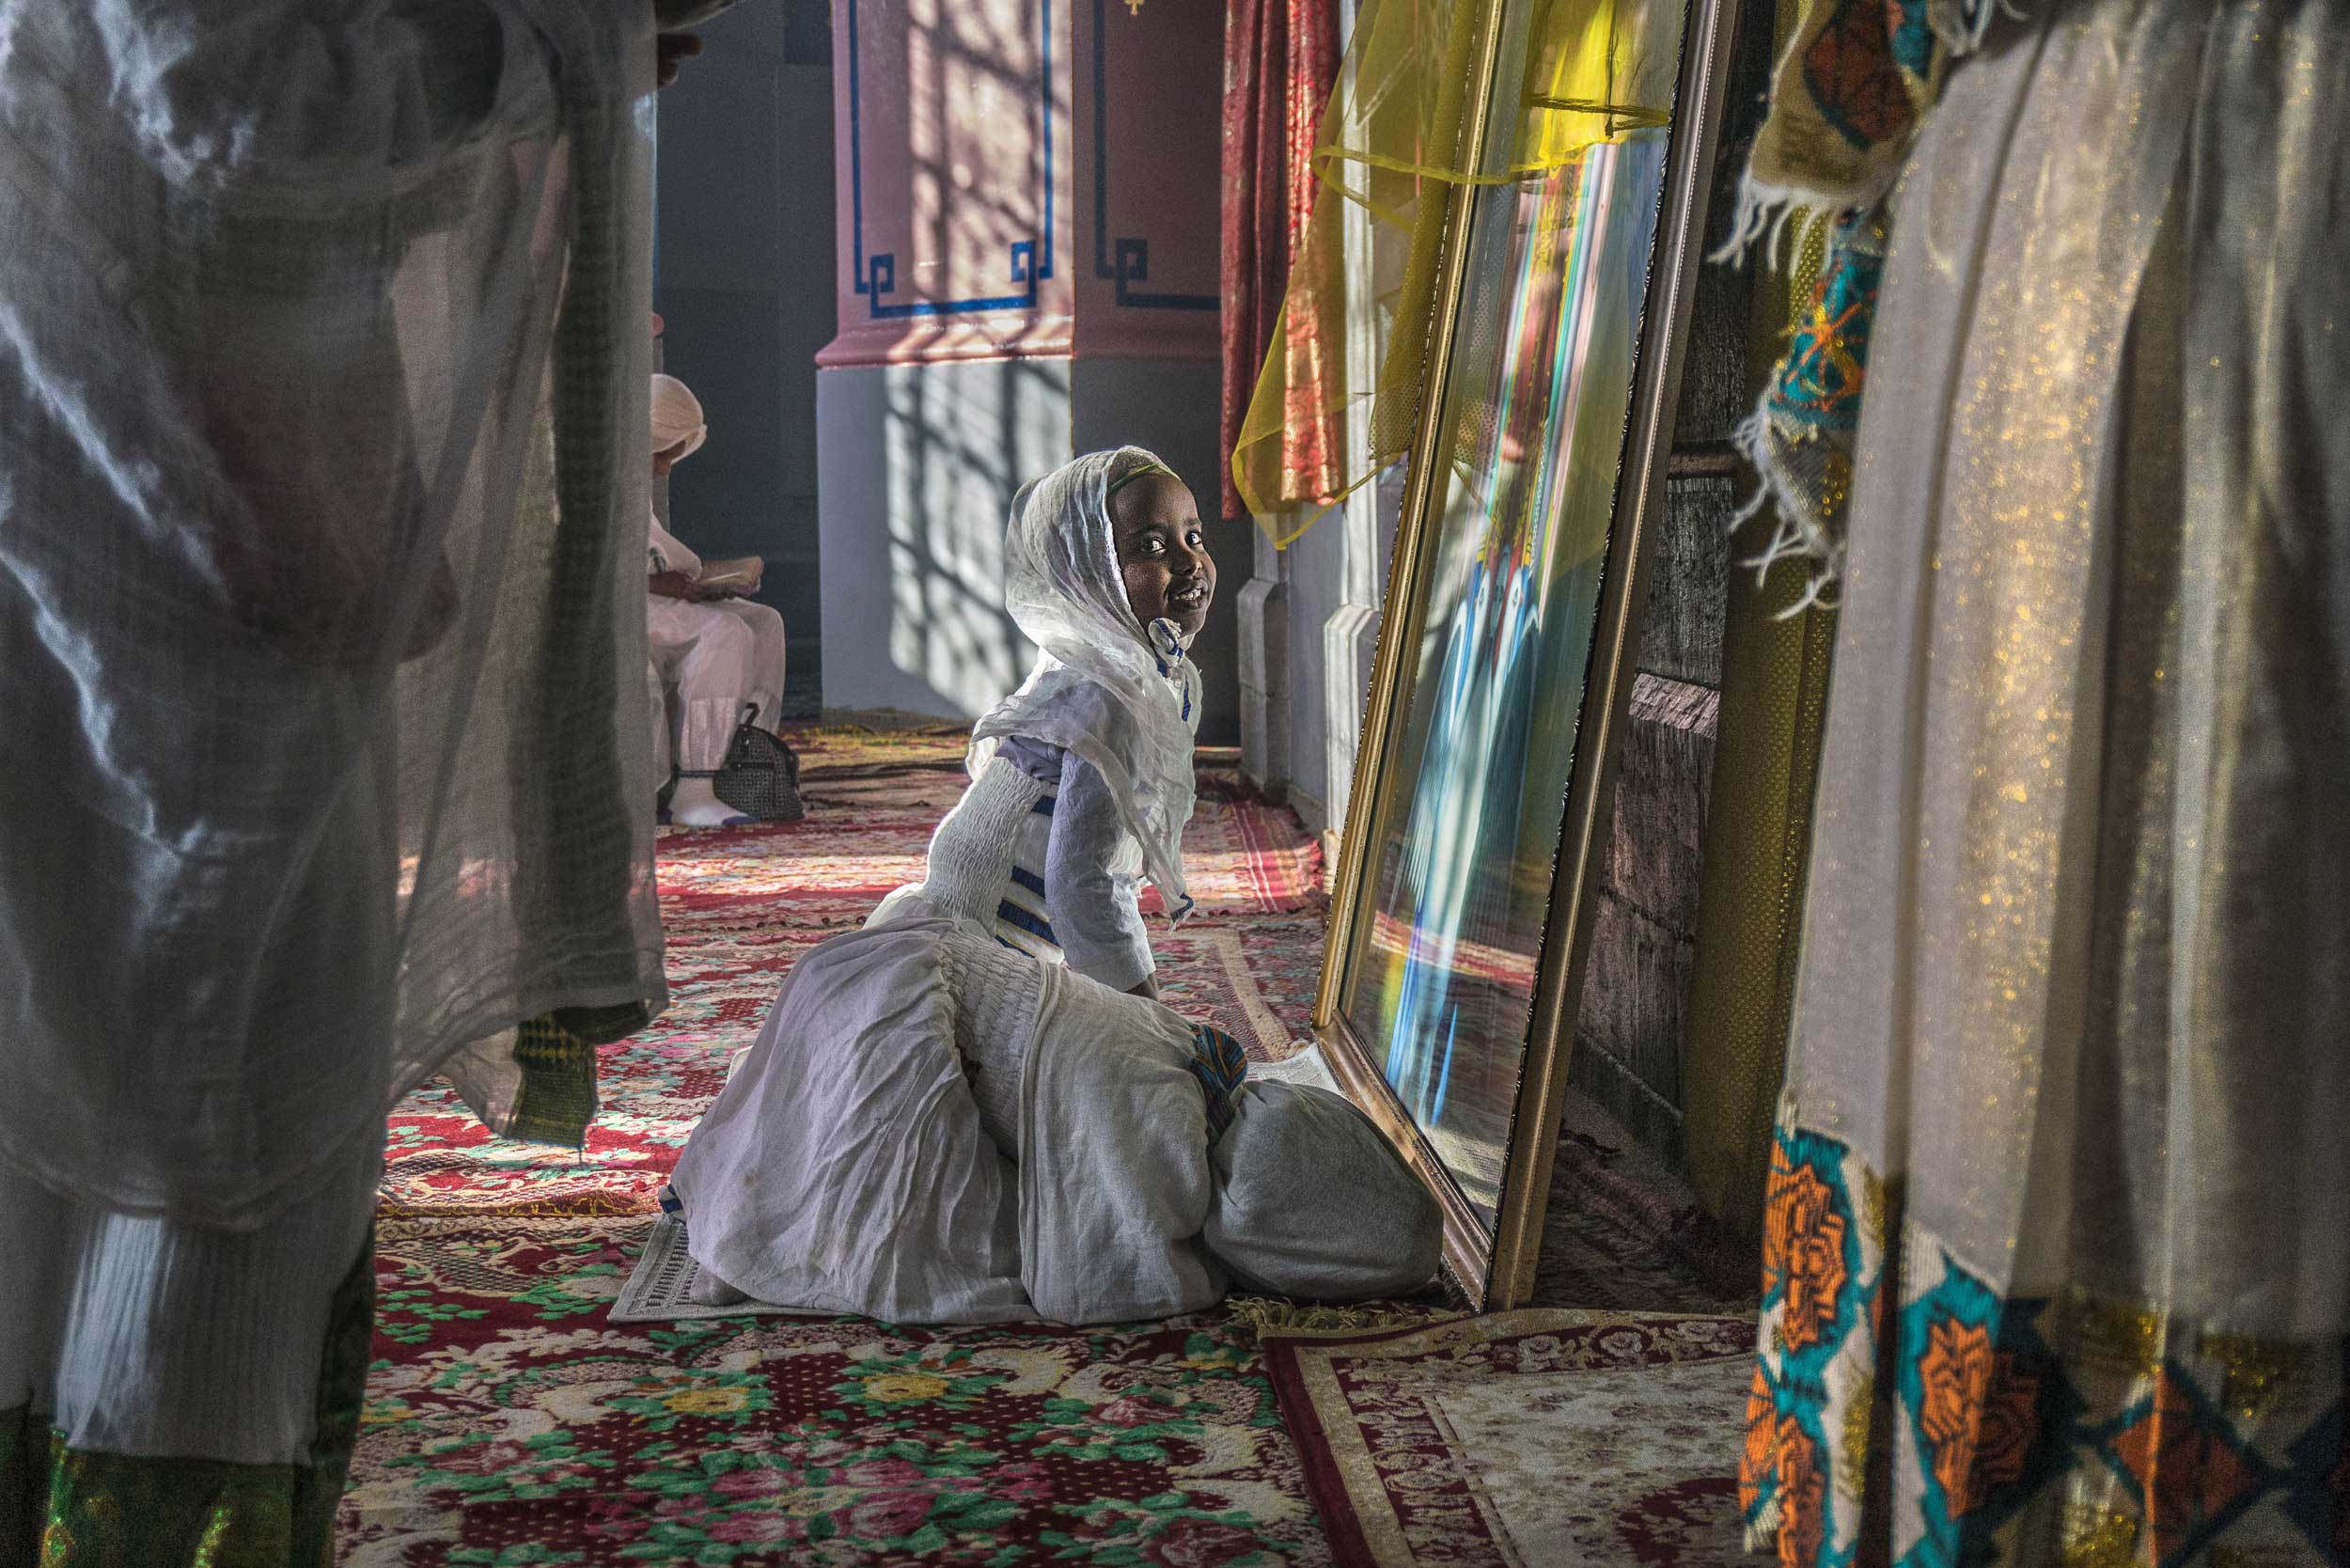 A kneeling girl in front of a mirror dressed in white and a head scarf, Jerusalem